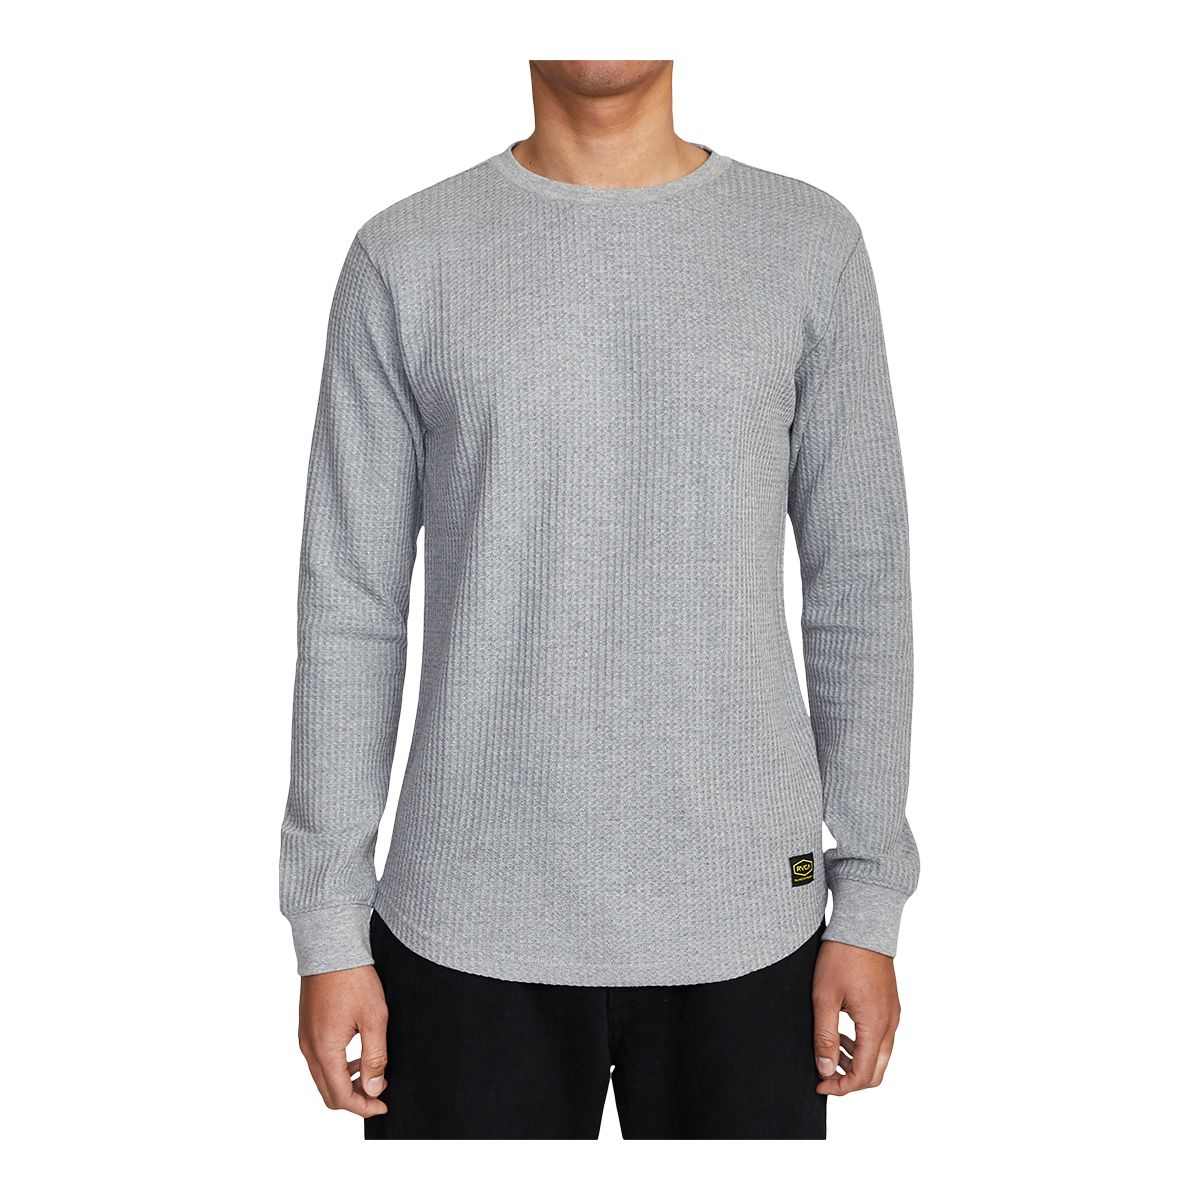 Rvca Men's Day Shift Long Sleeve Thermal